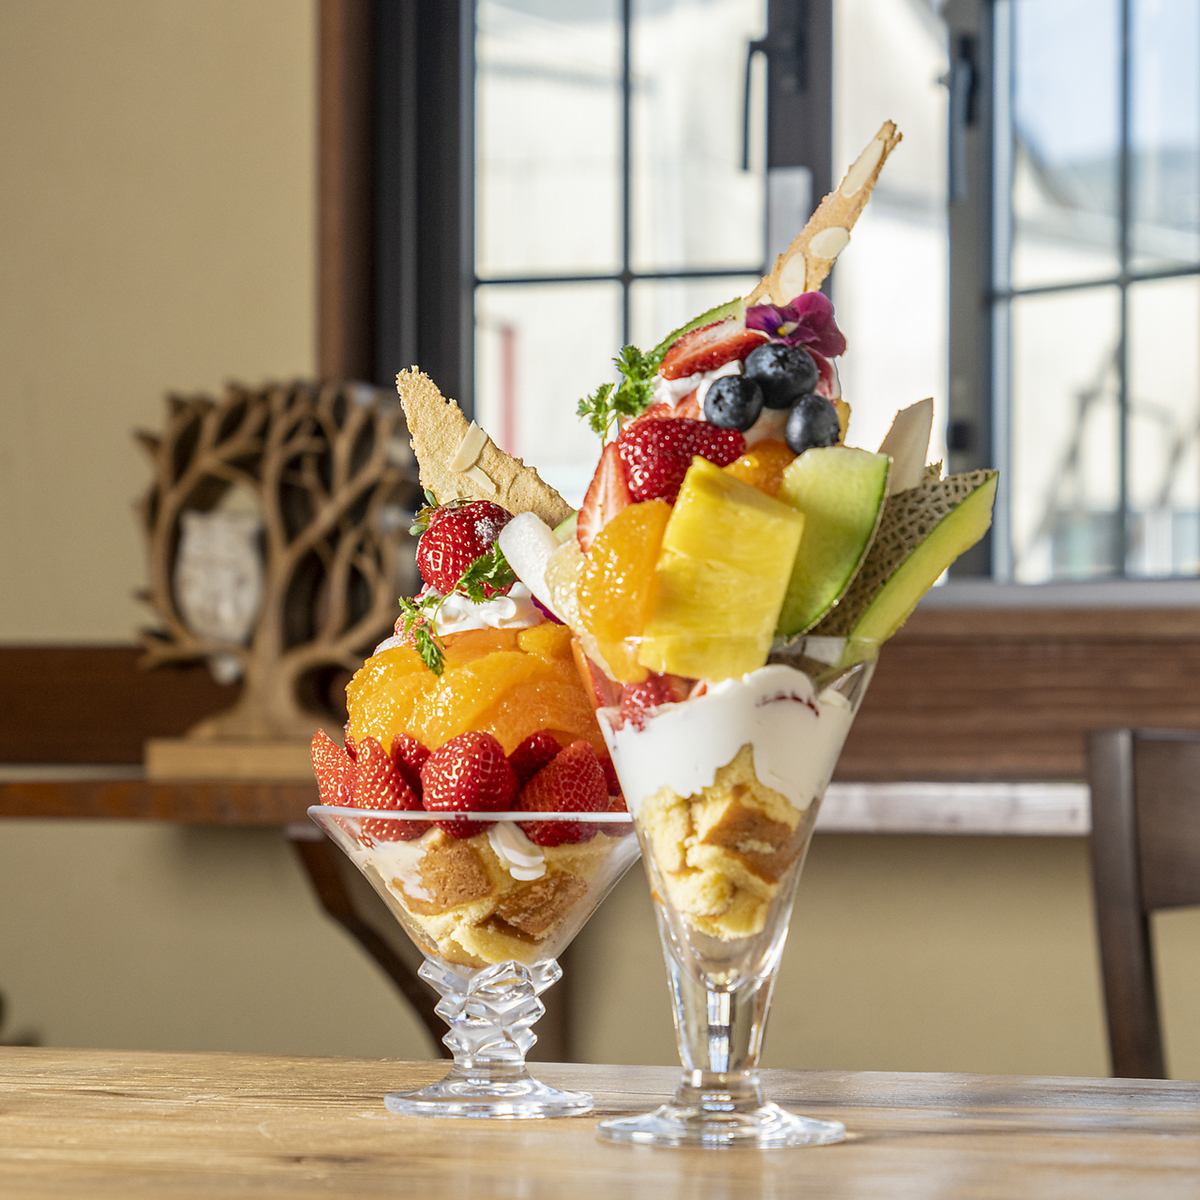 We recommend various parfaits that use seasonal fruits luxuriously.